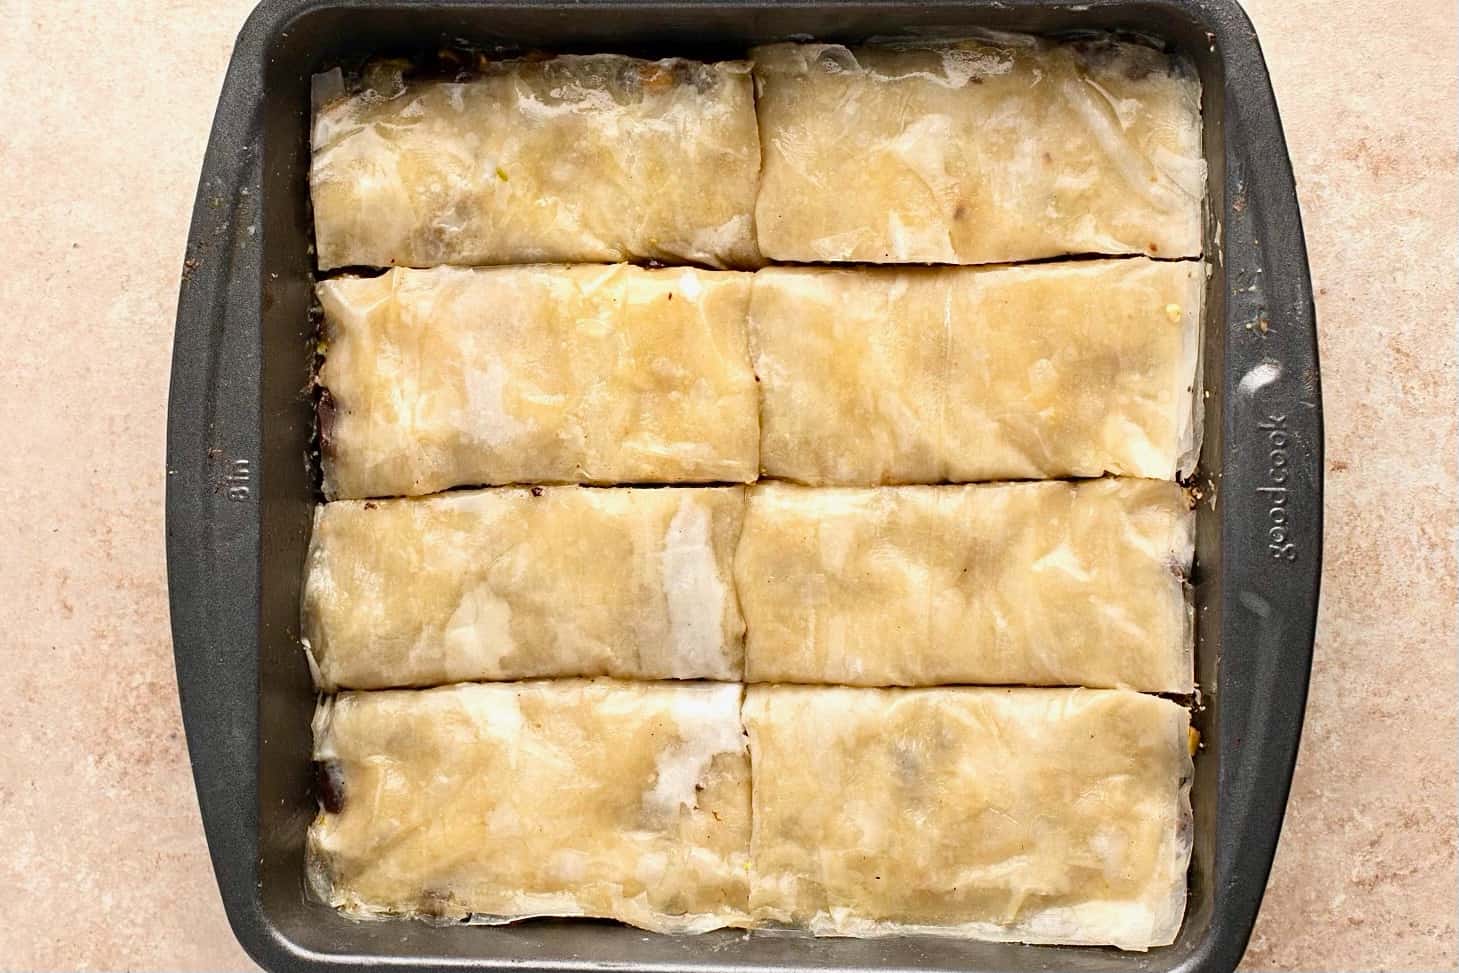 How to cut Chocolate Baklava in pieces